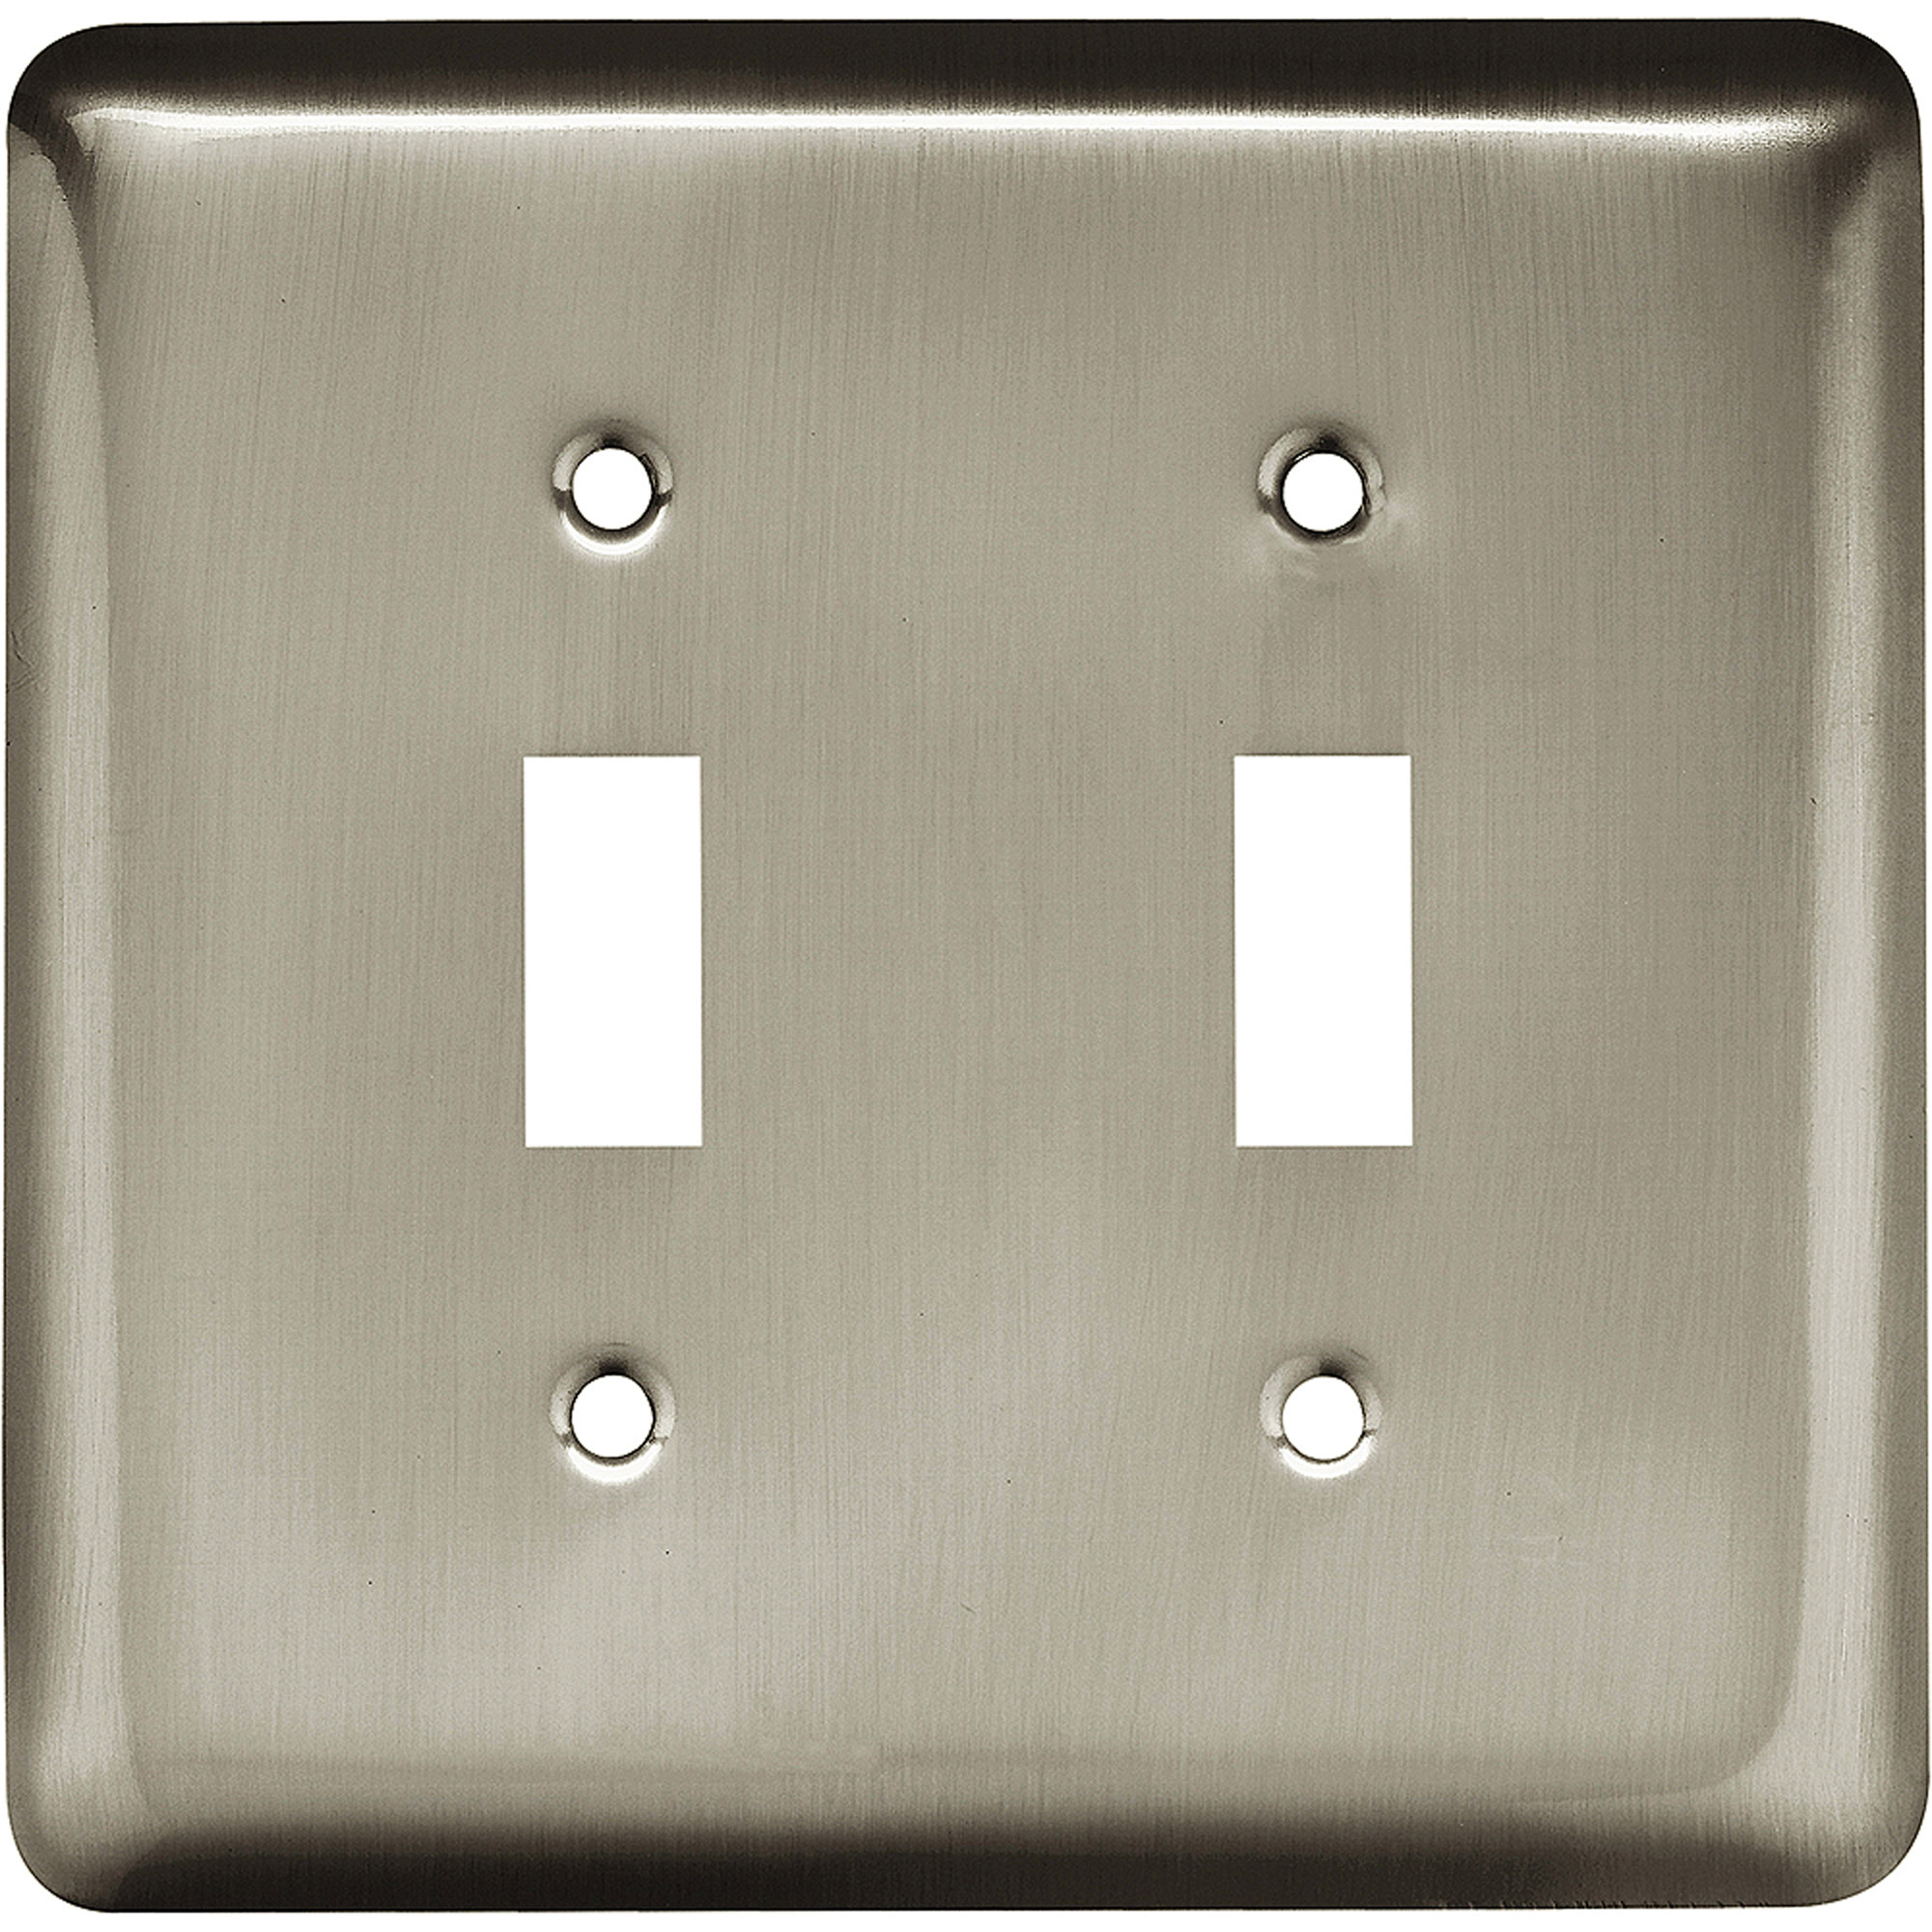 Brainerd Rounded Corner Double Switch Wall Plate, Available in Multiple Colors - image 1 of 5